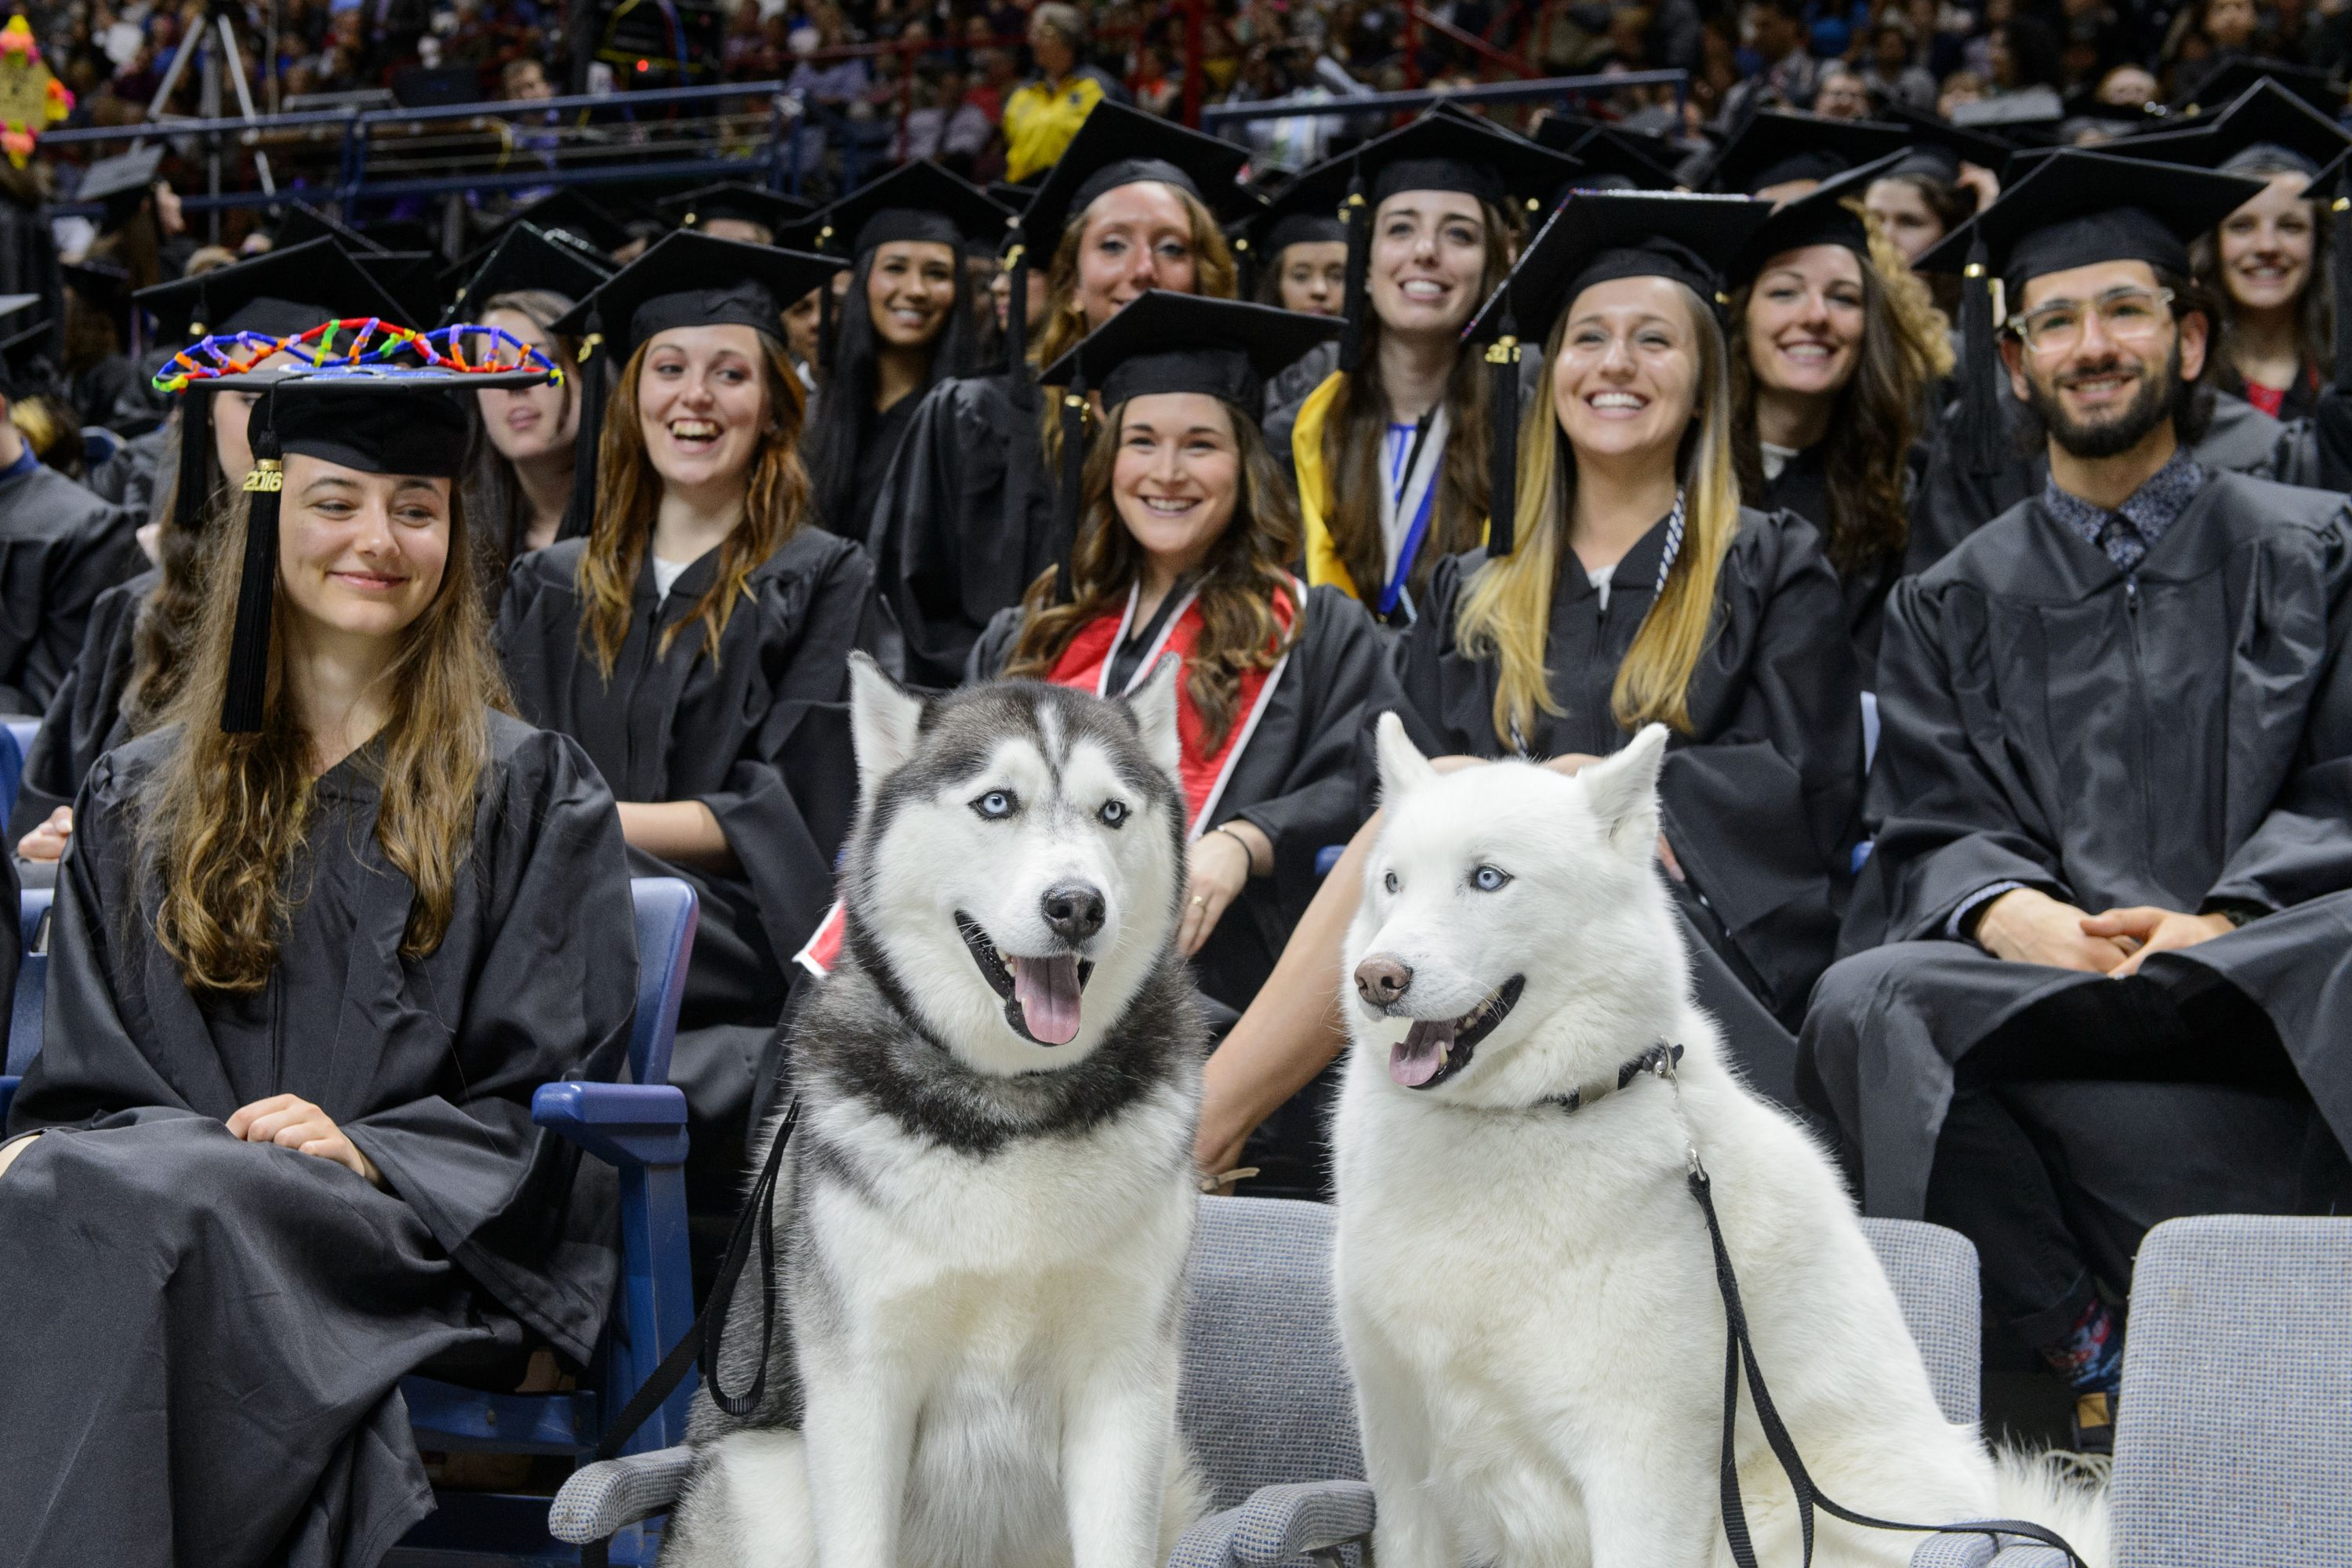 Jonathan XIV, left, and Jonathan XIII sit with students during the midday College of Liberal Arts and Sciences commencement ceremony at Gampel Pavilion on May 8, 2016. (Peter Morenus/UConn Photo)